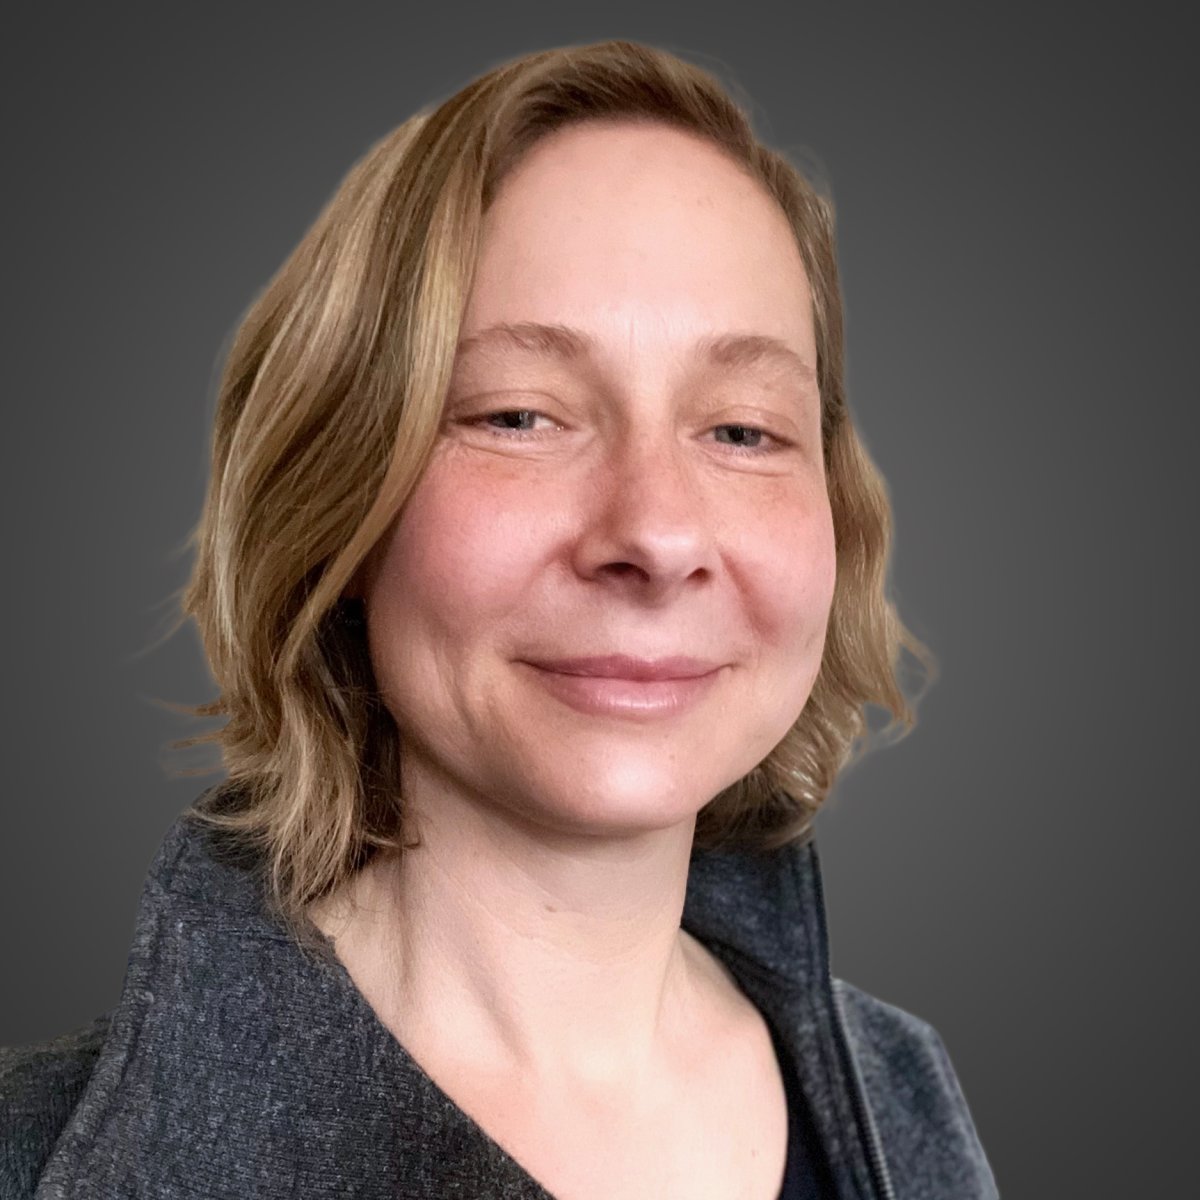 The Green Party of Ontario has nominated Fiona Jager as candidate in the riding of Leeds-Grenville-Thousand Islands and Rideau Lakes.